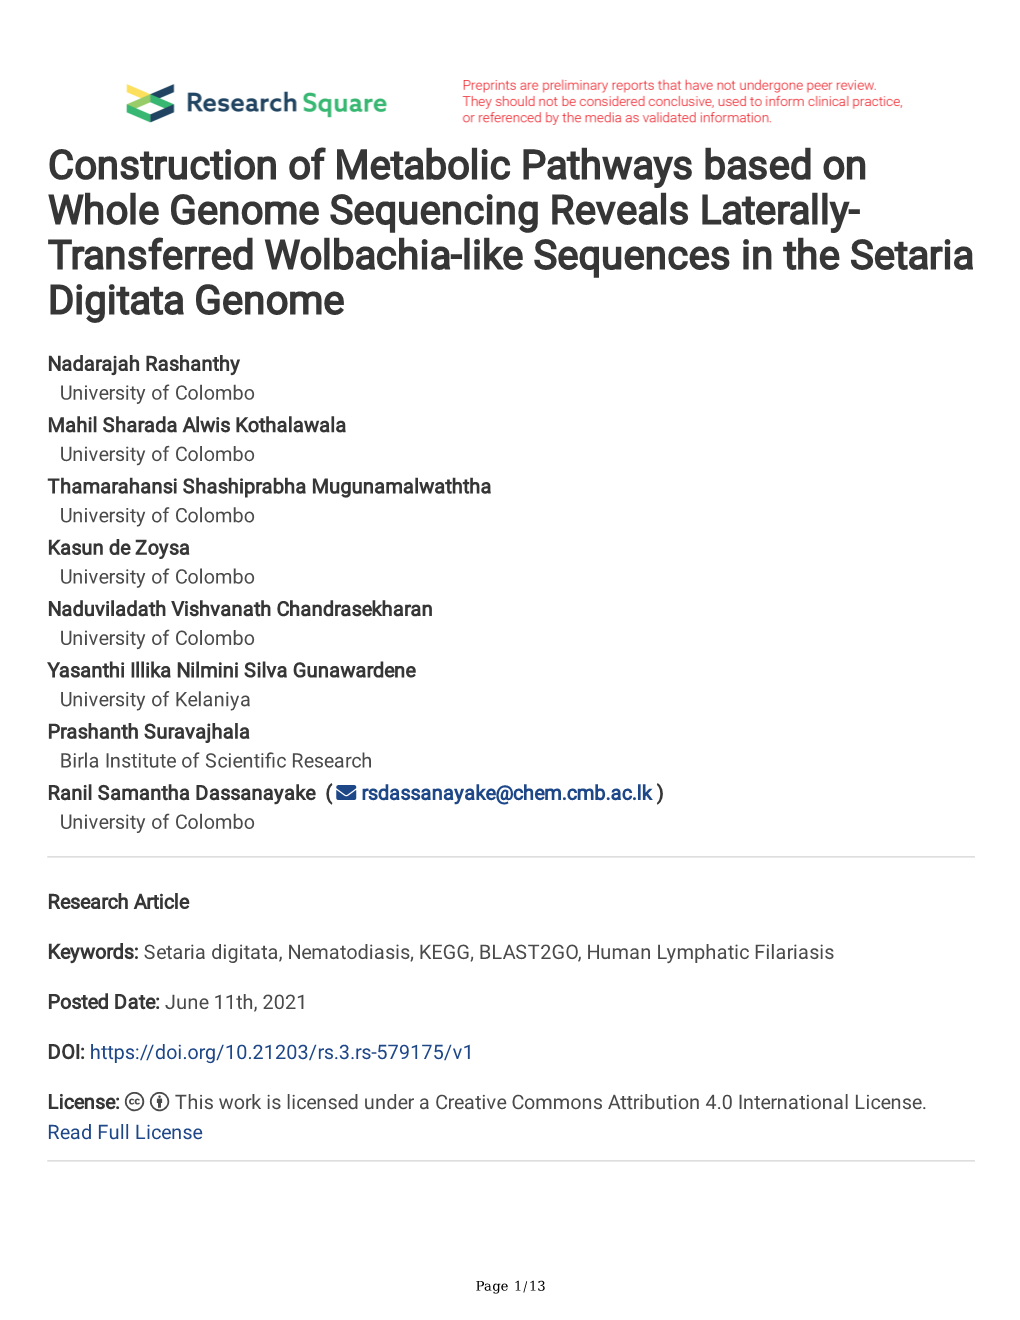 Construction of Metabolic Pathways Based on Whole Genome Sequencing Reveals Laterally- Transferred Wolbachia-Like Sequences in the Setaria Digitata Genome